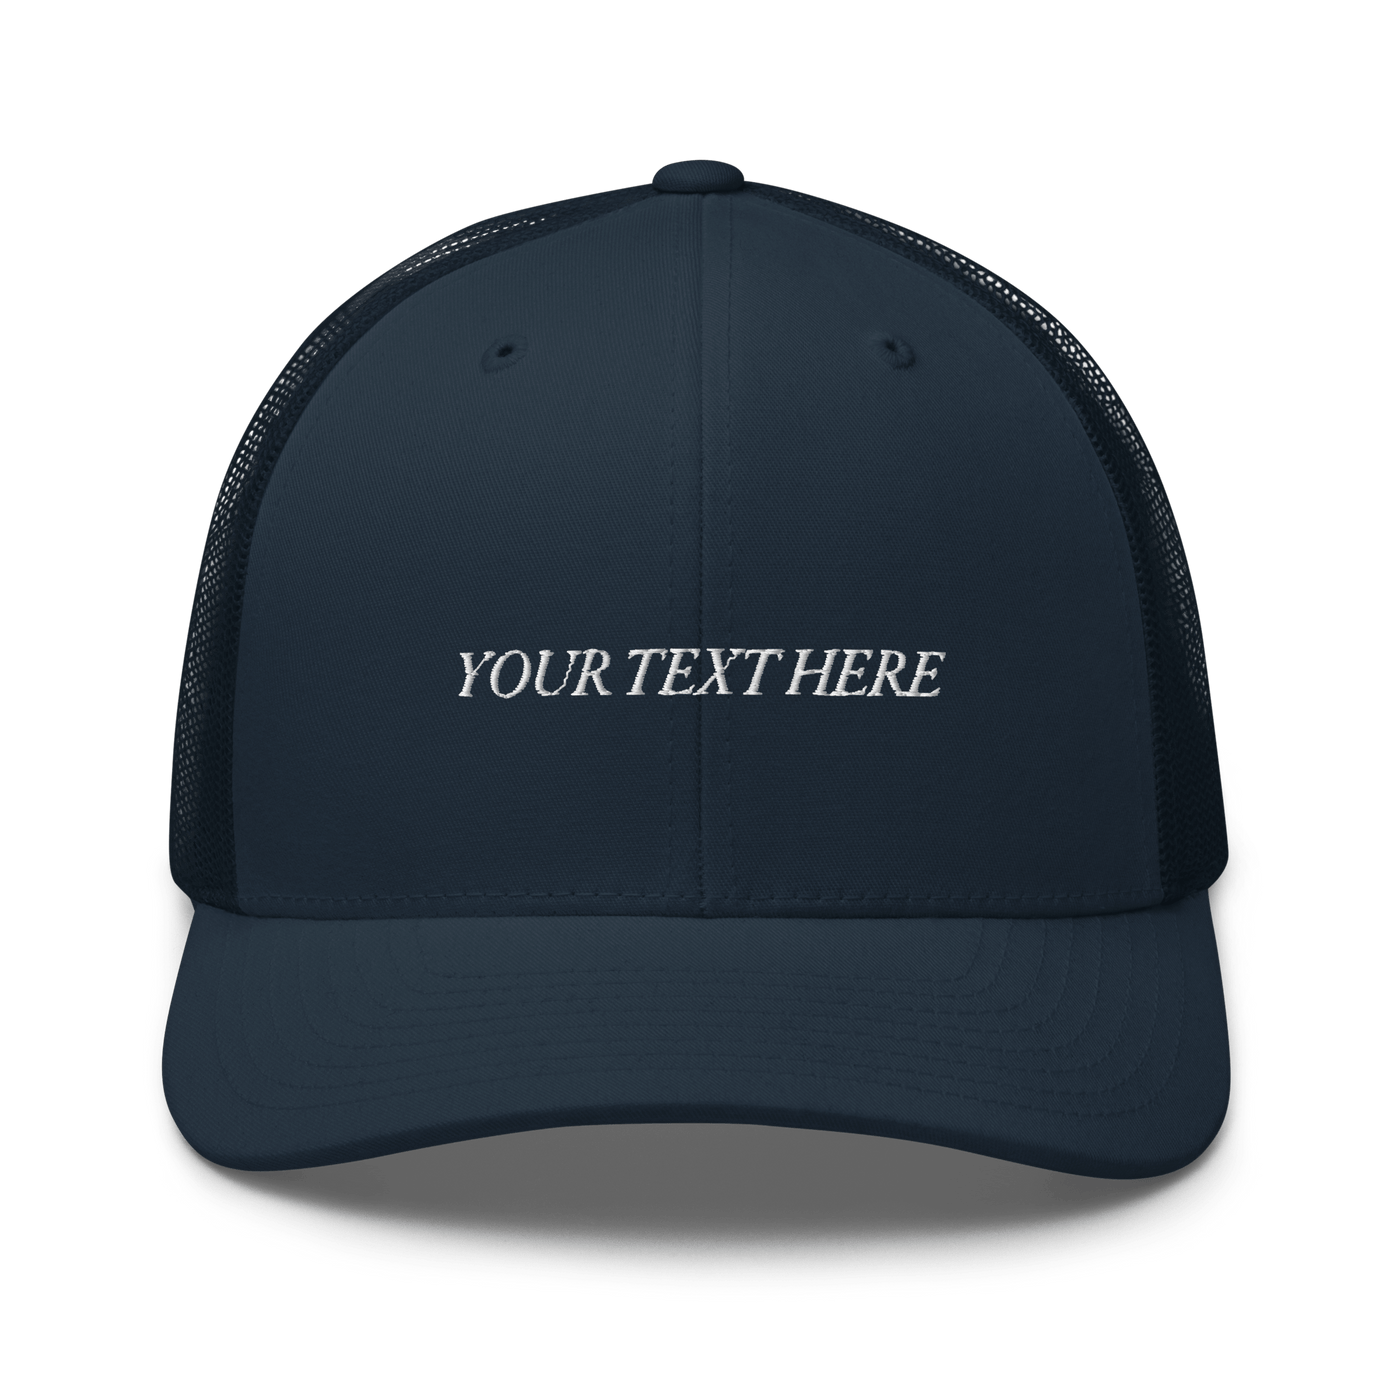 Customize Your Own Trucker Cap - Italic Font - Navy - - Just Another Cap Store